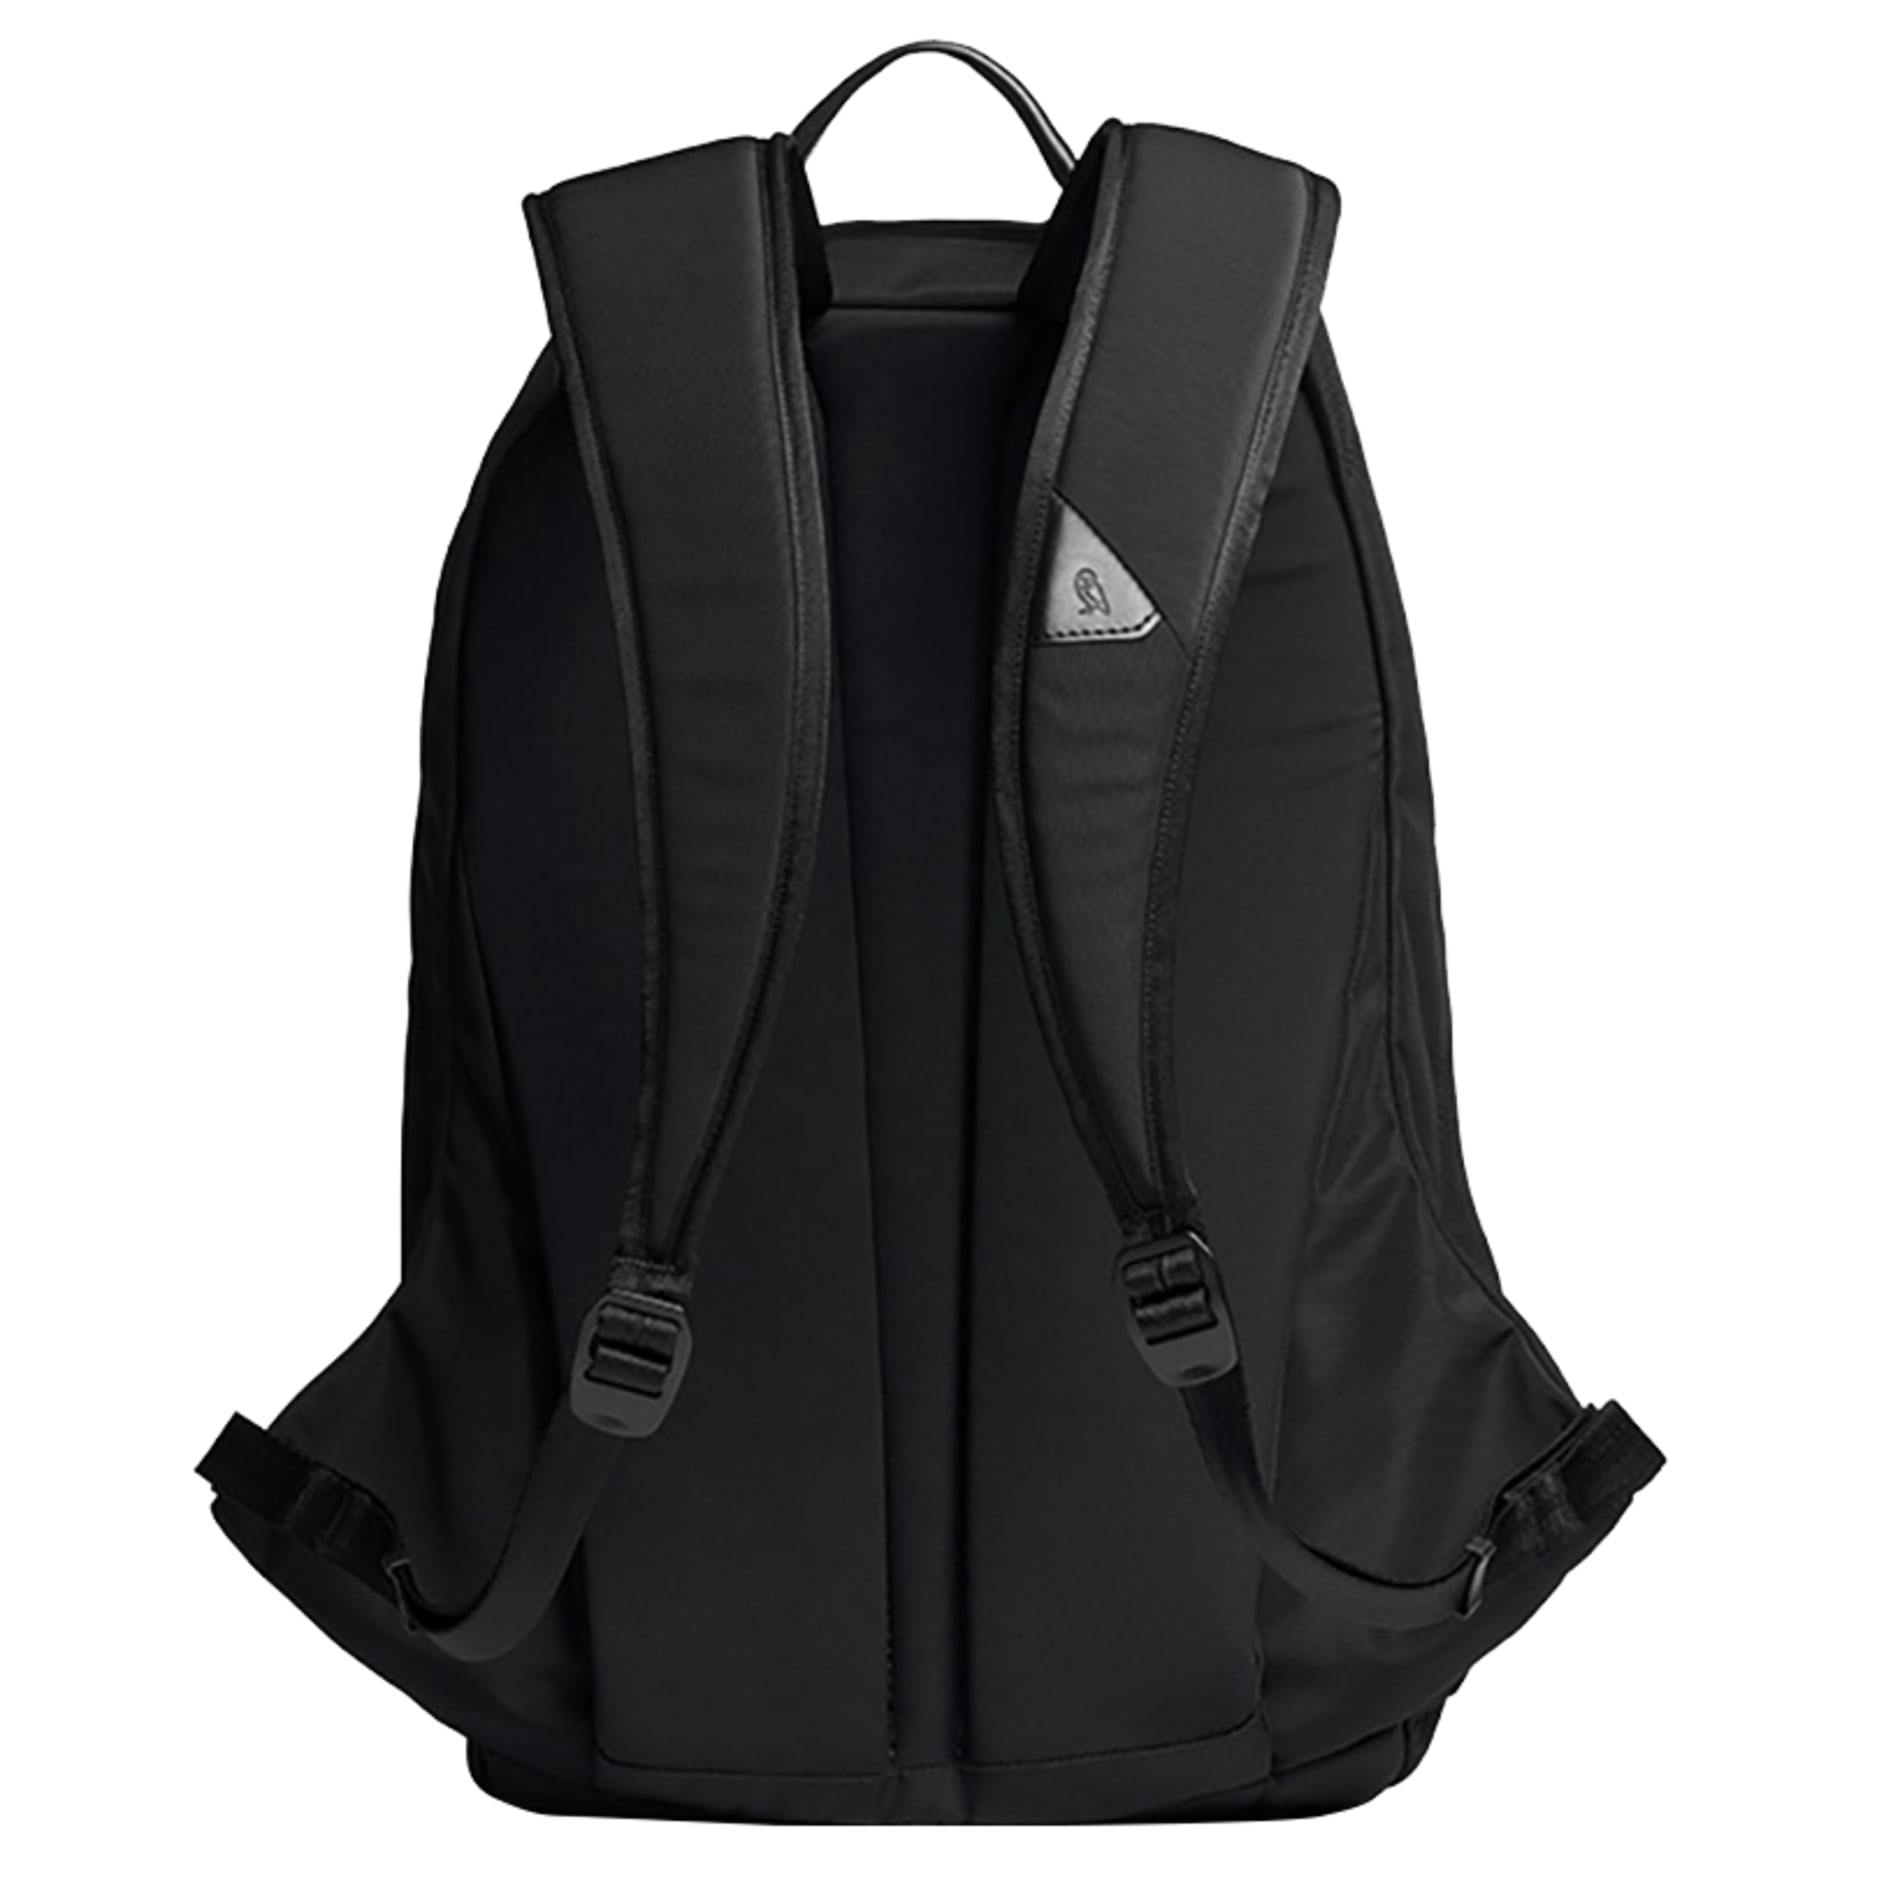 Bellroy Classic 16" Computer Backpack - additional Image 3